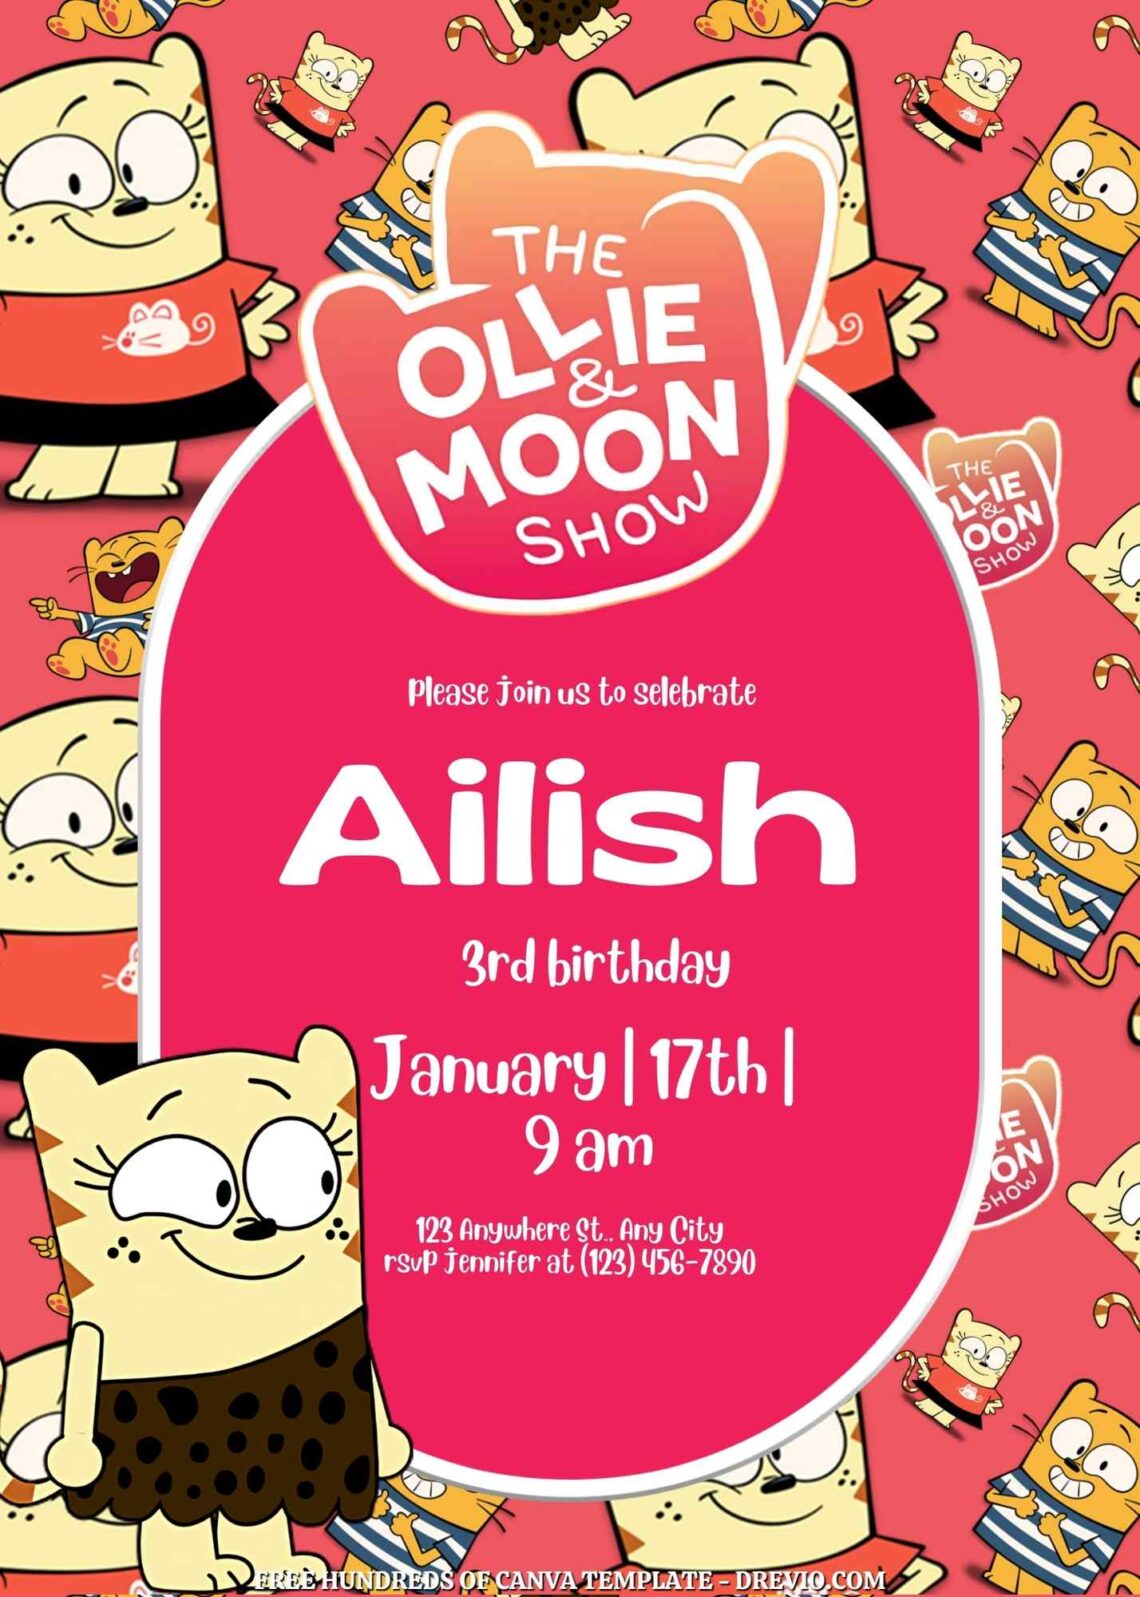 The Ollie & Moon Show Birthday Invitations with Group in the Background